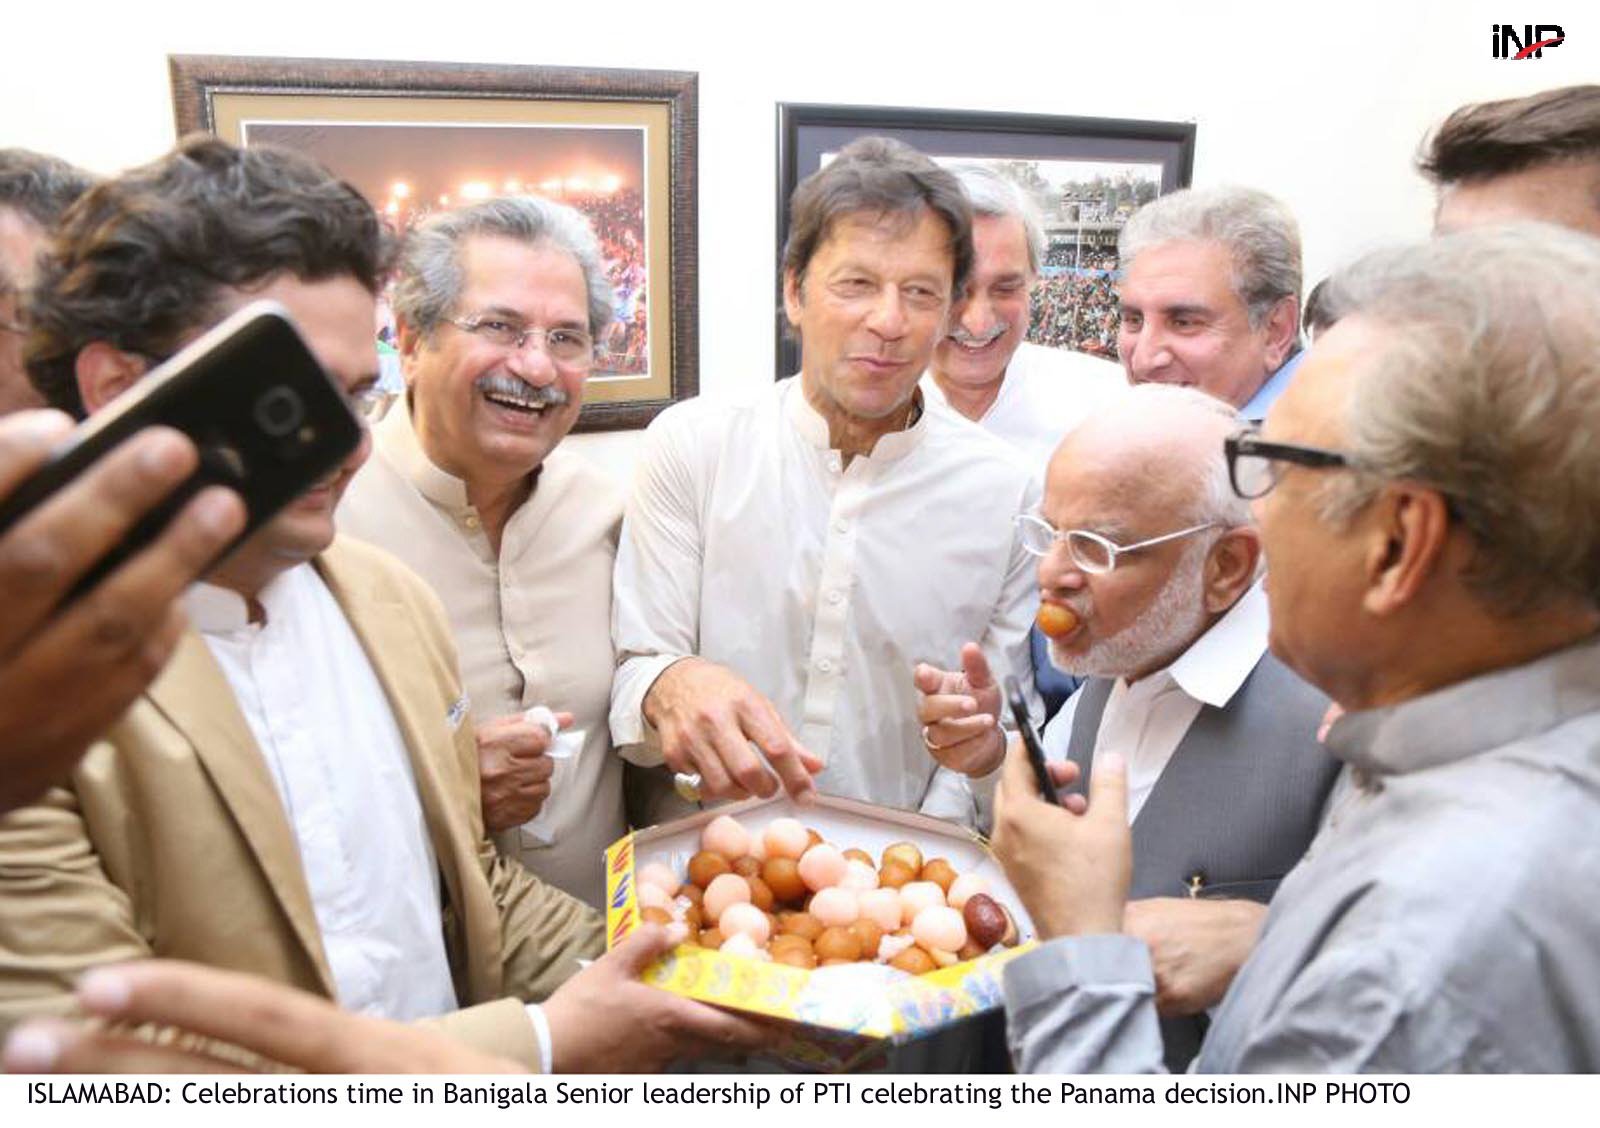 pti leaders exchange sweets after the sc announced its judgemnet photo inp